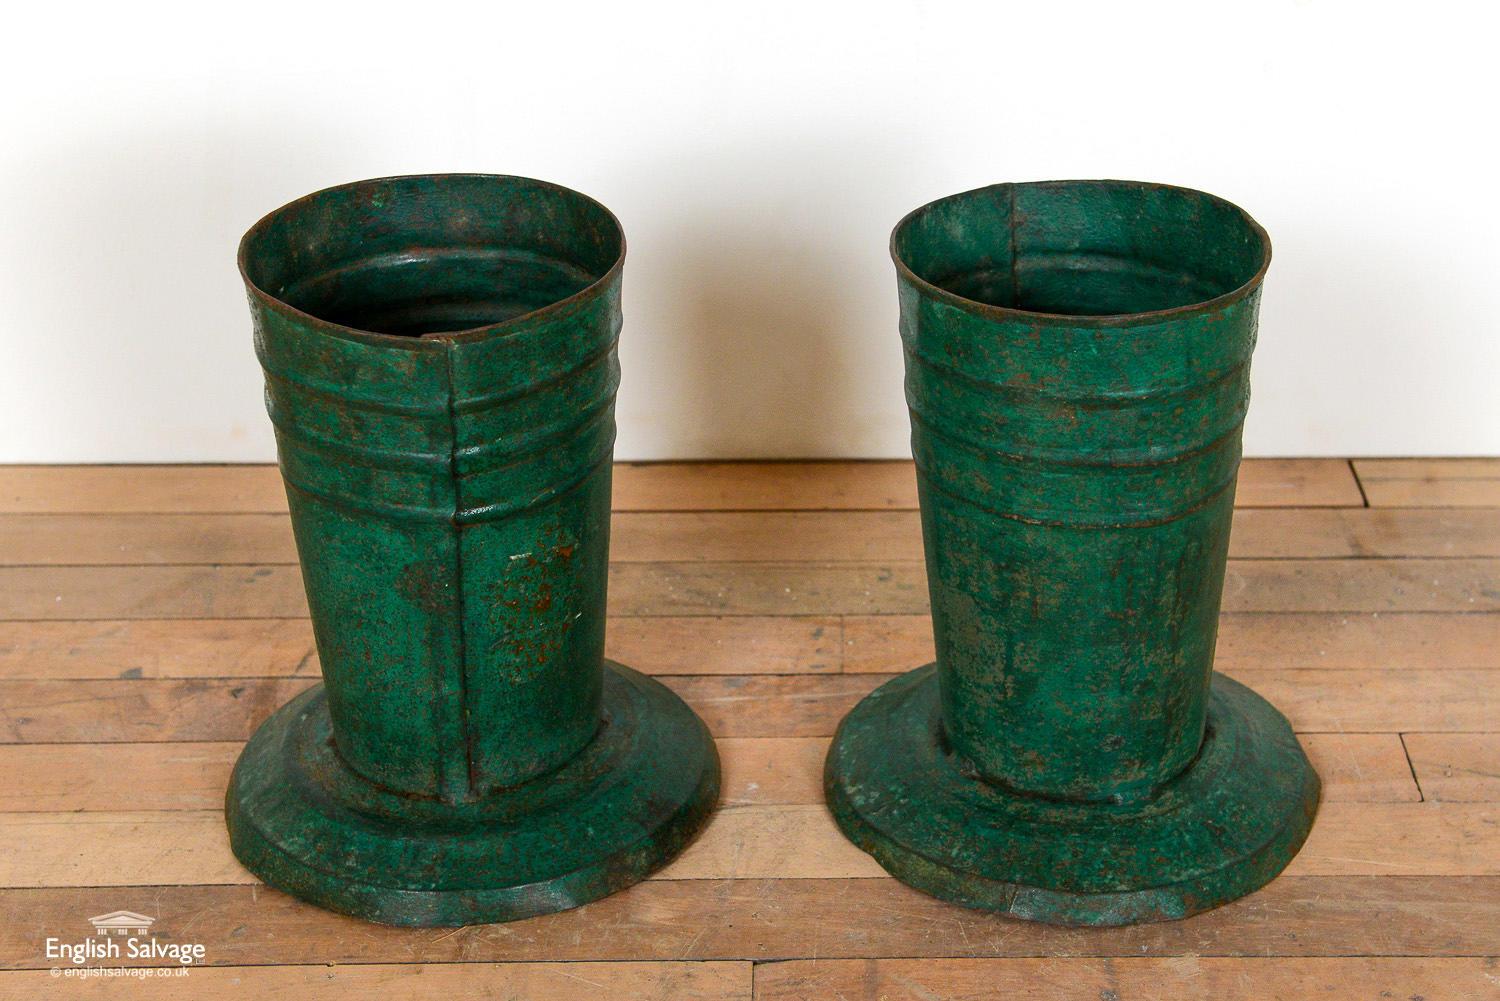 Rustic Vases or Pots Made from Recycled Metal, 20th Century In Good Condition For Sale In London, GB